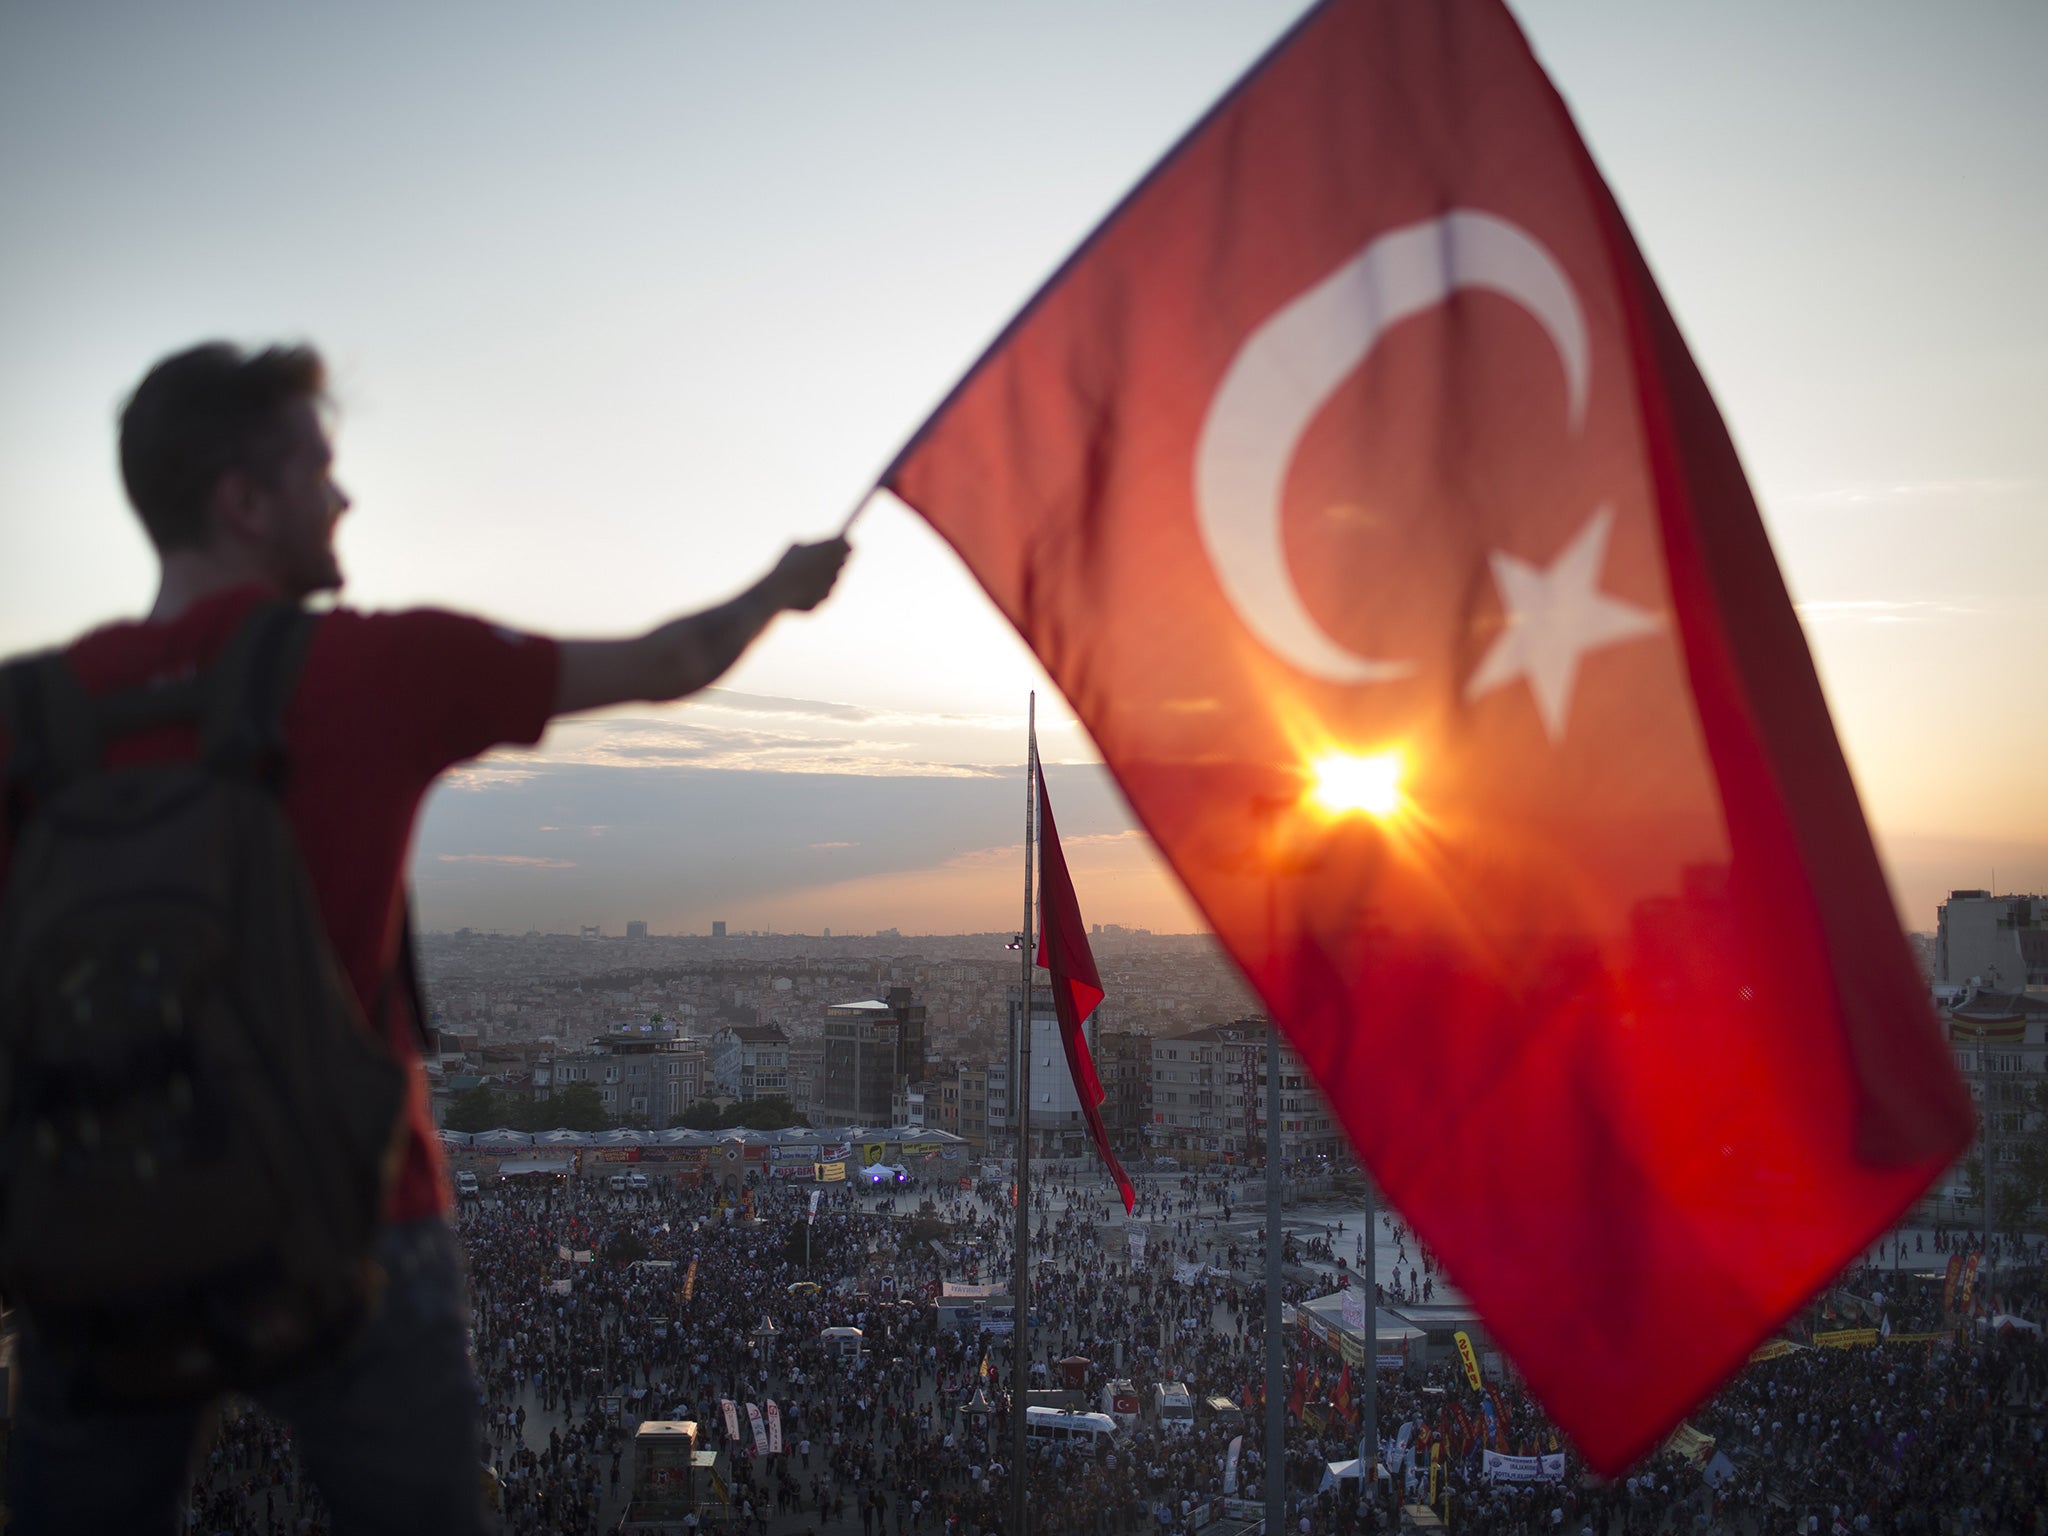 According to a survey conducted by the Pew Research Centre, only 52 per cent of Turks believe people should be free to criticise their government without hindrance